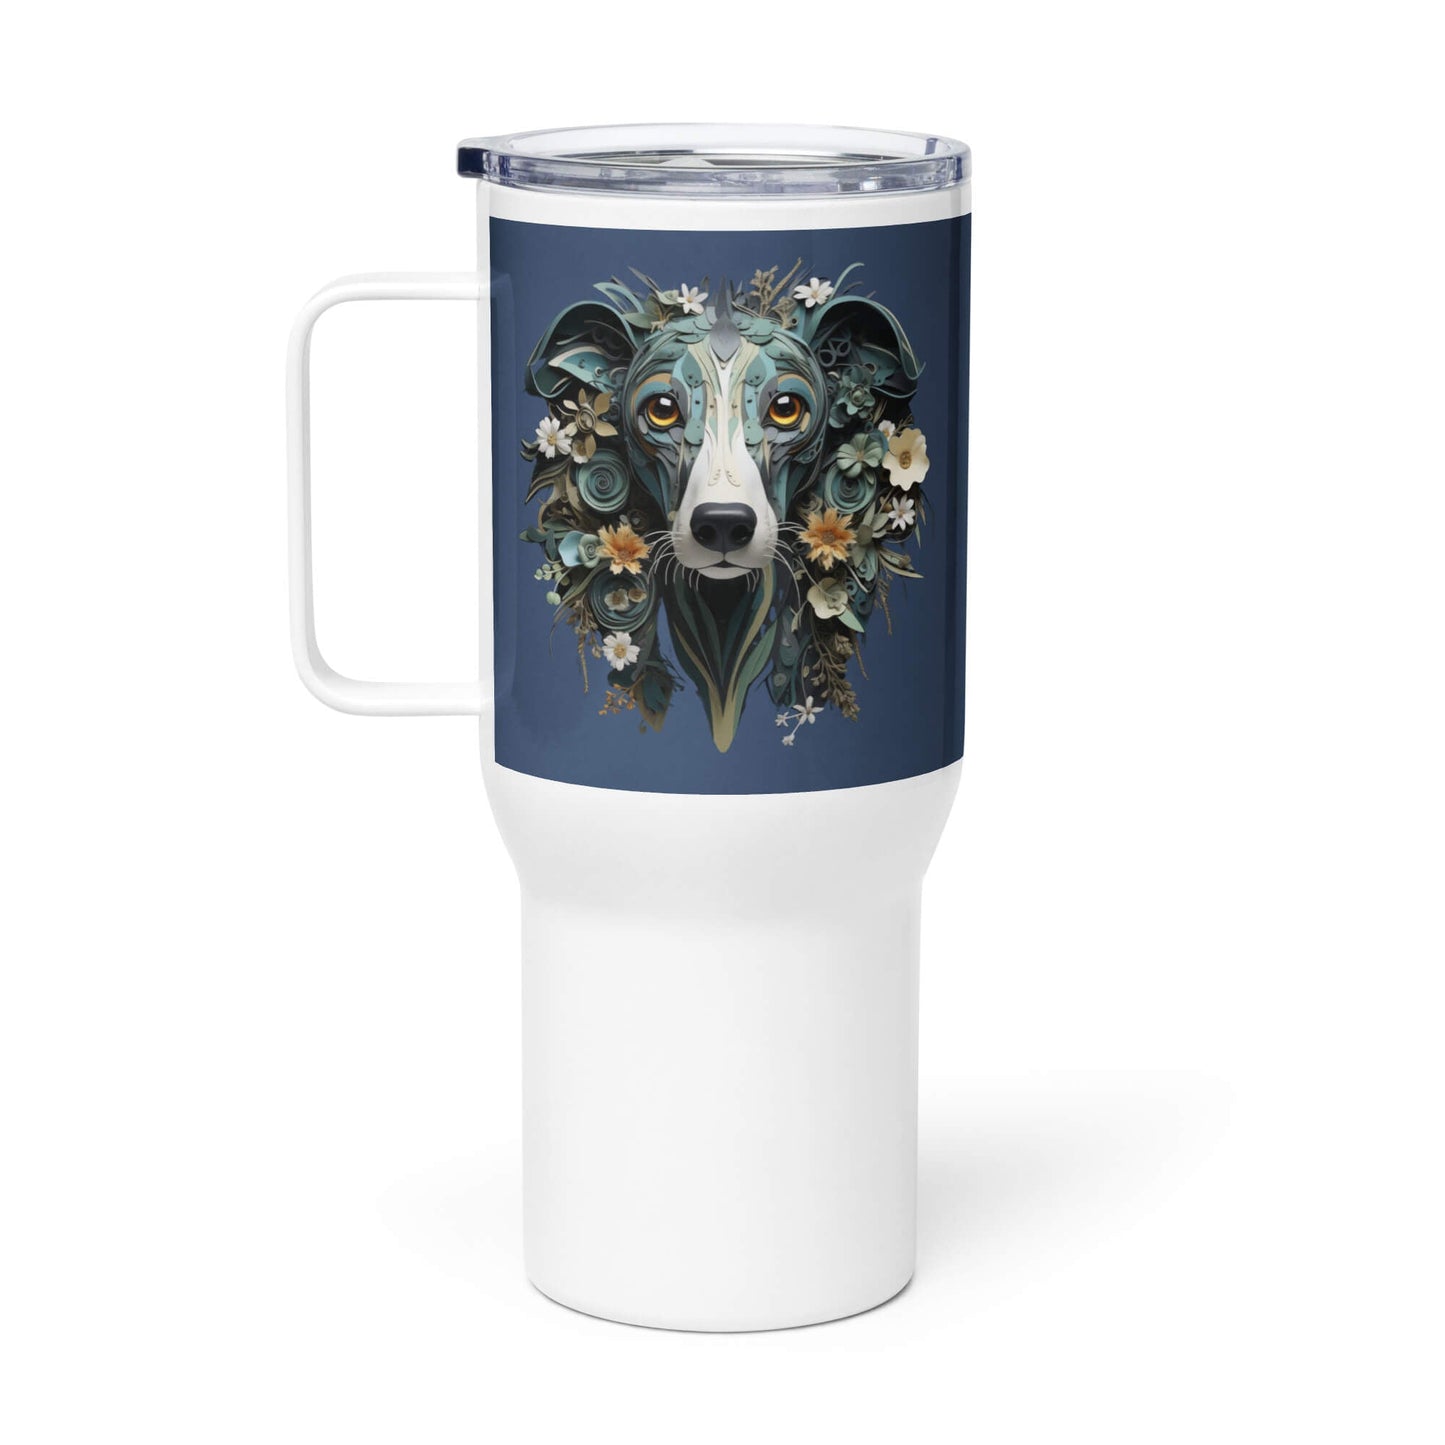 25oz Travel Mug with a Handle - Greyhound Paper Quilling Design - Hobbster